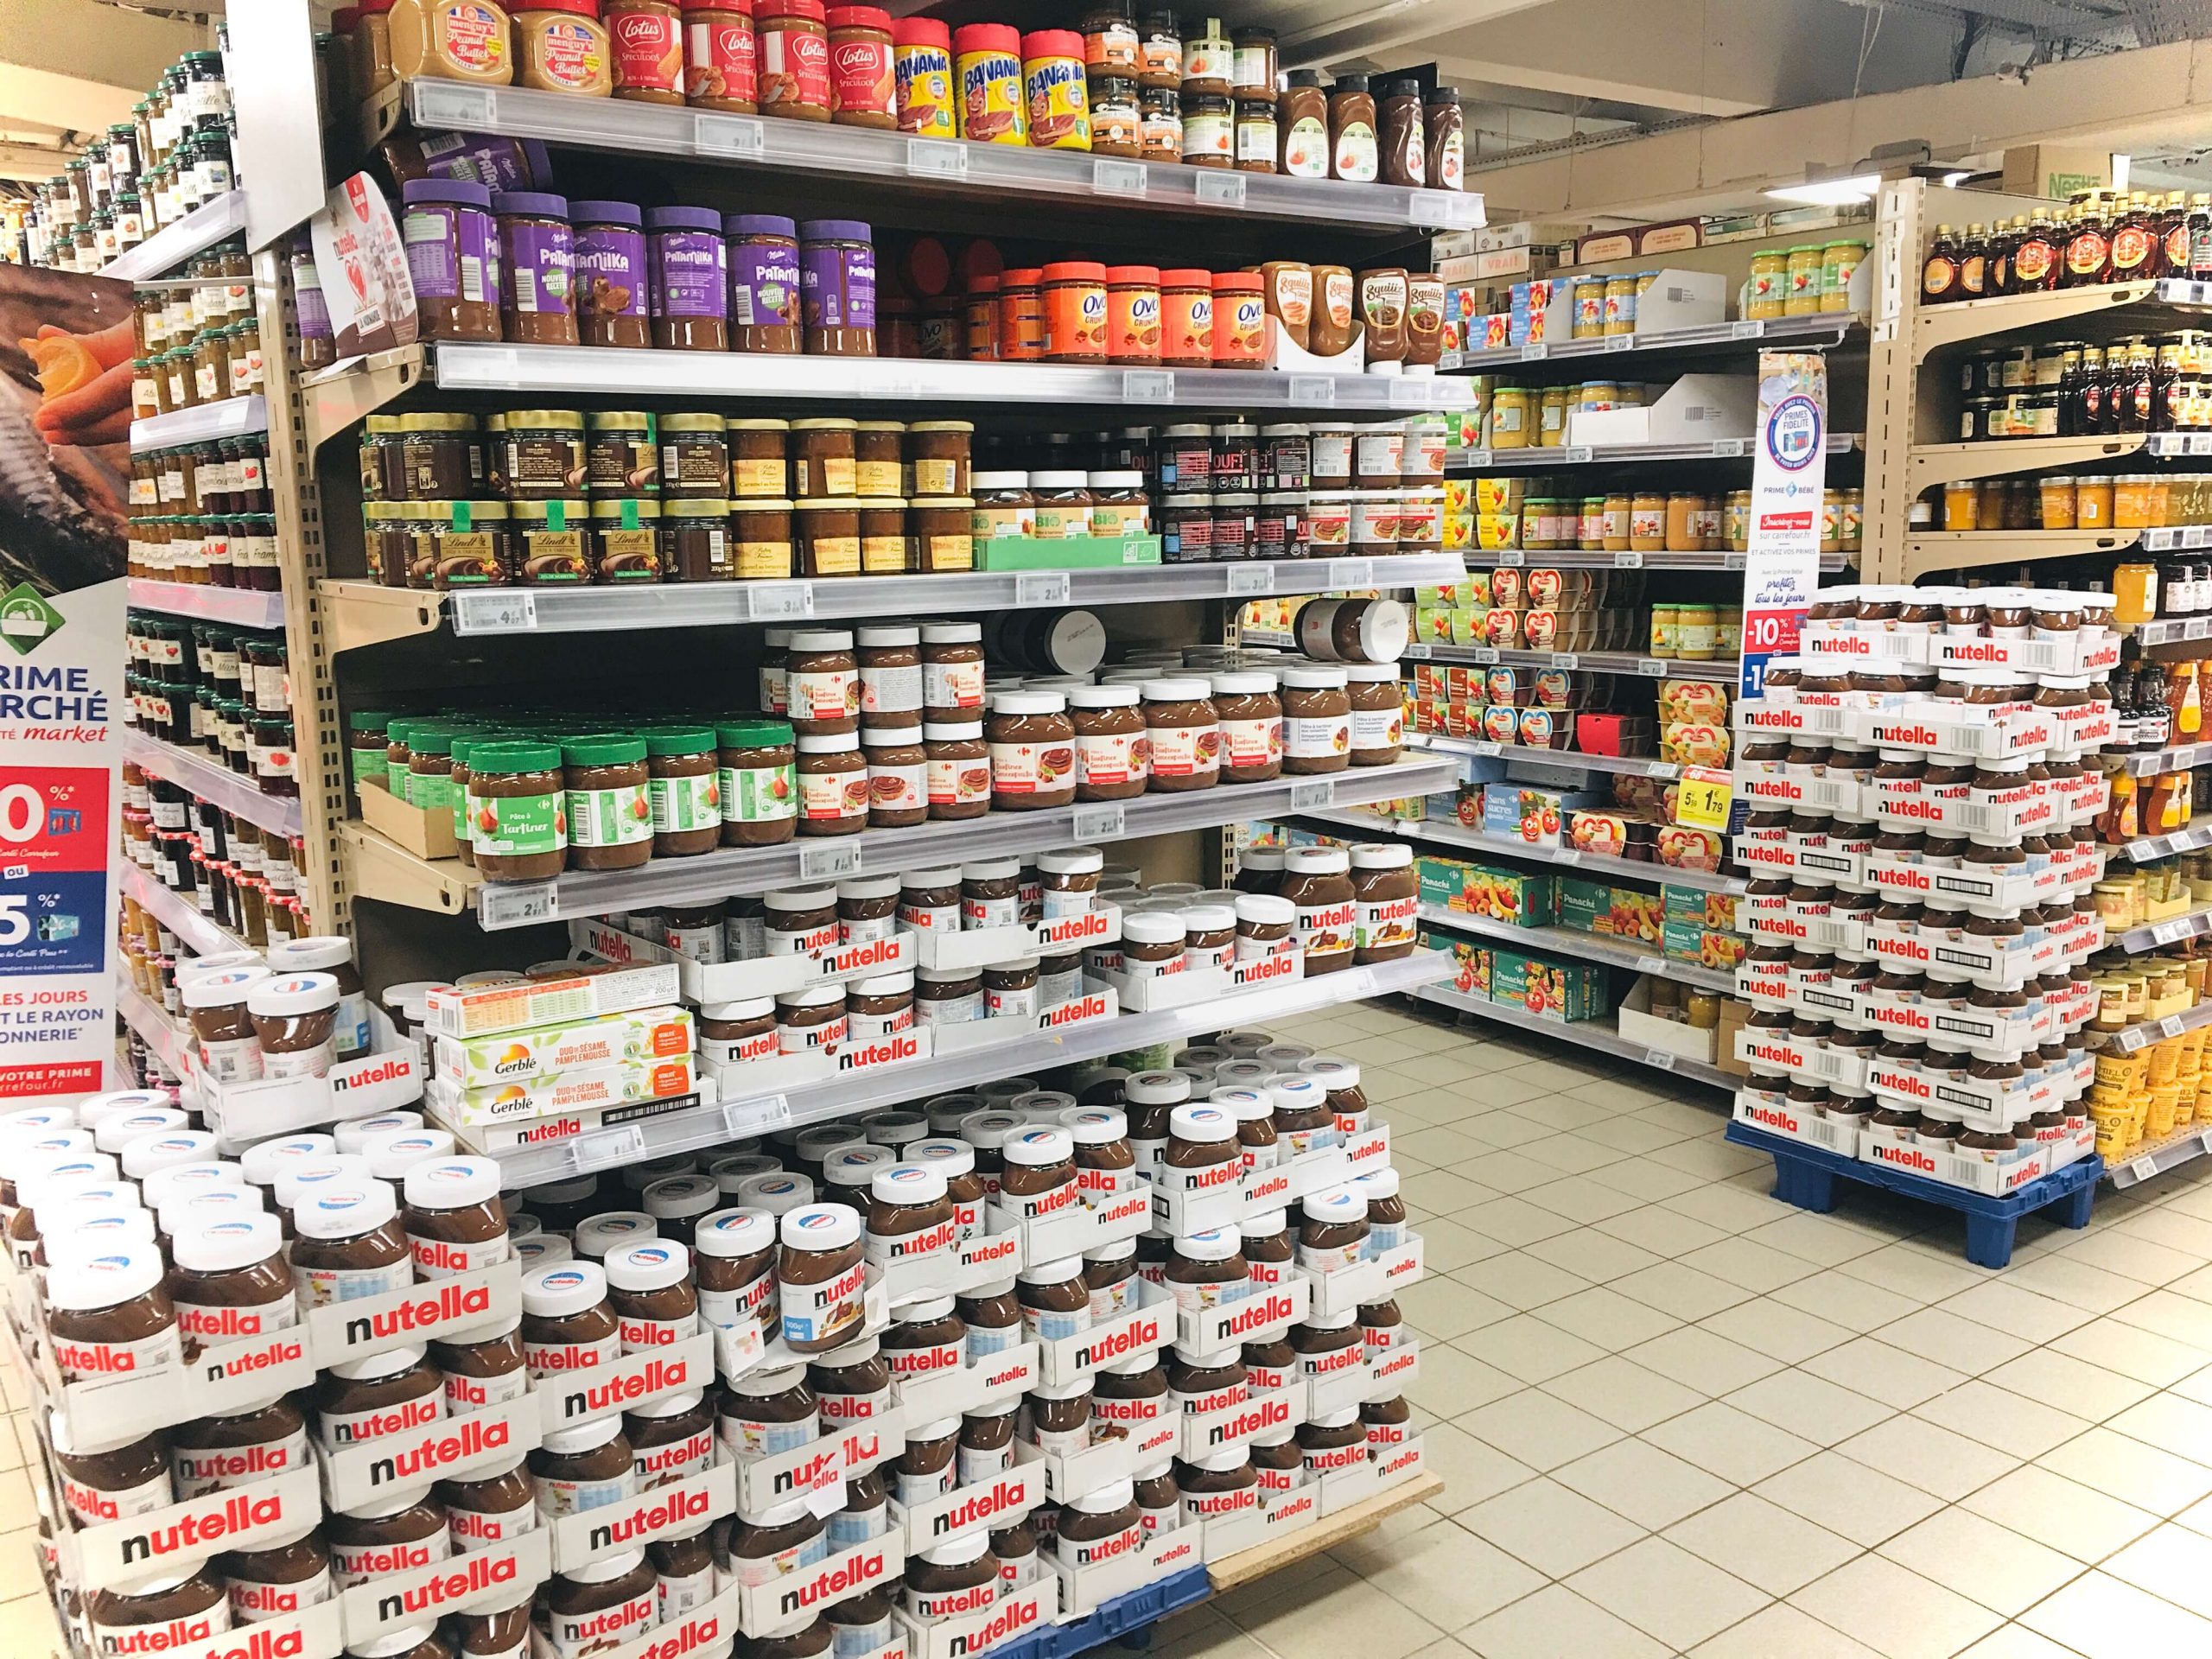 Many jars of pate a tartiner on shelves at the grocery store